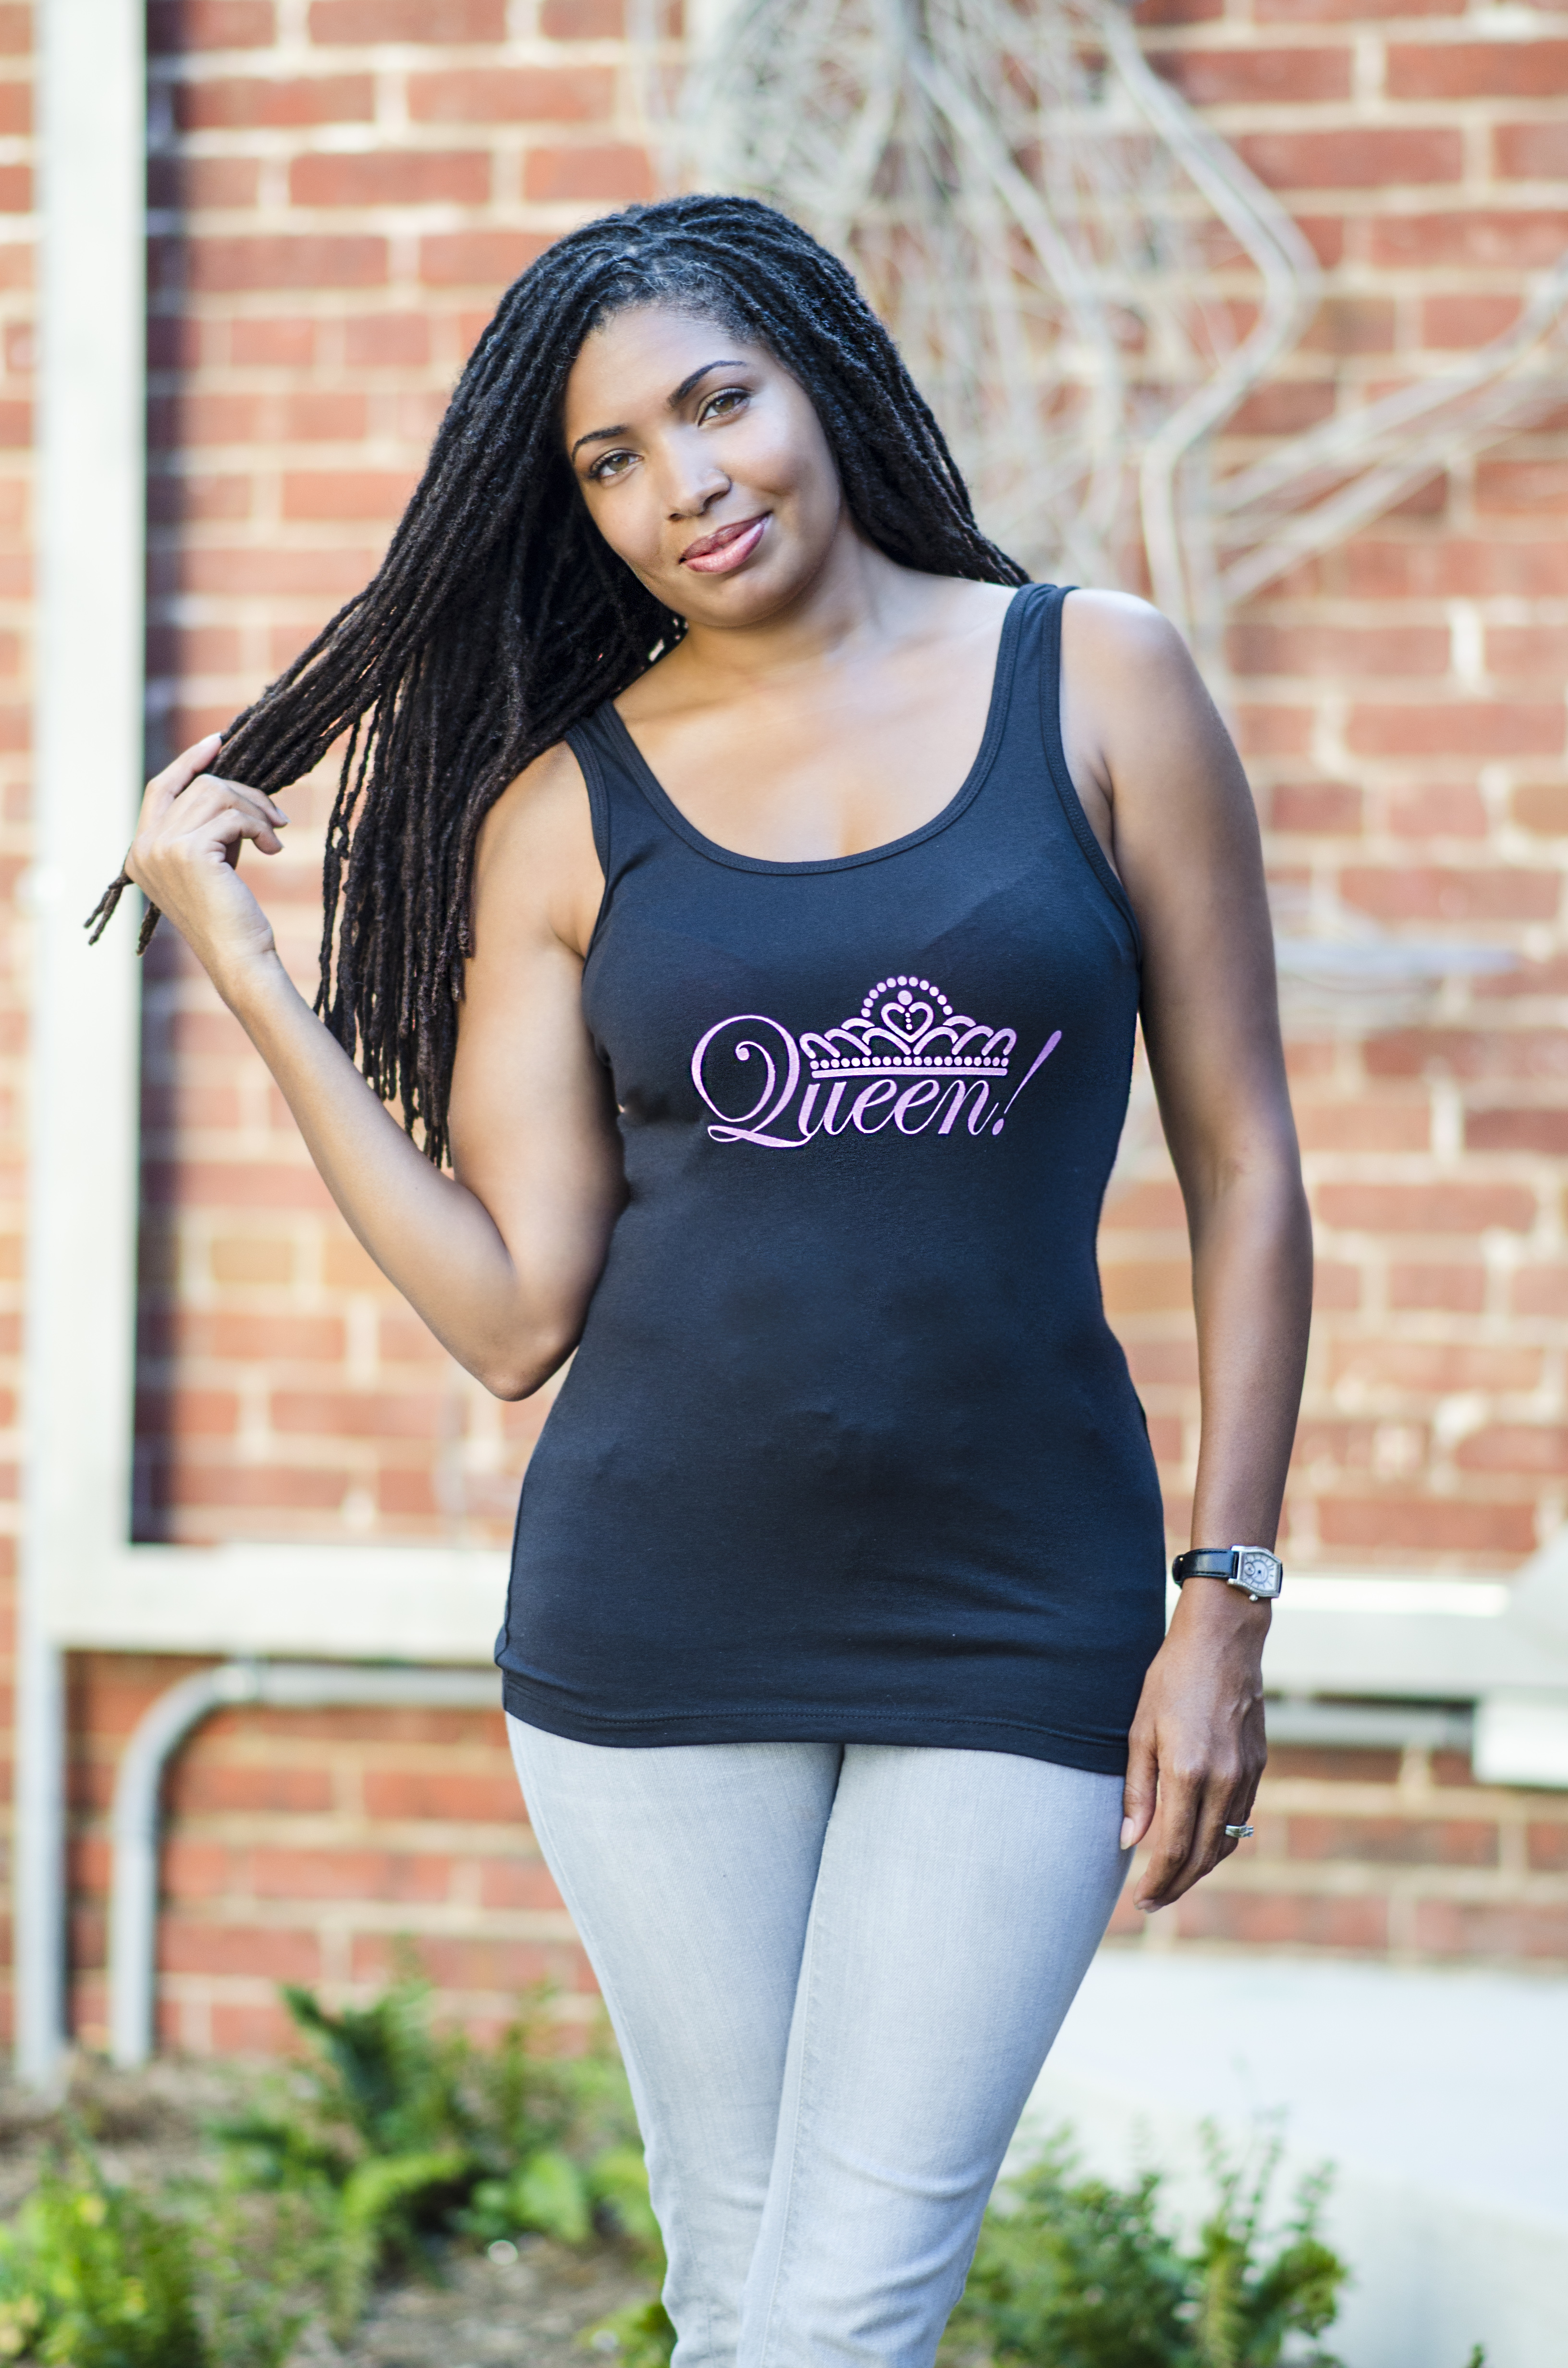 Stylish tanks and tops for the fashionista in you!